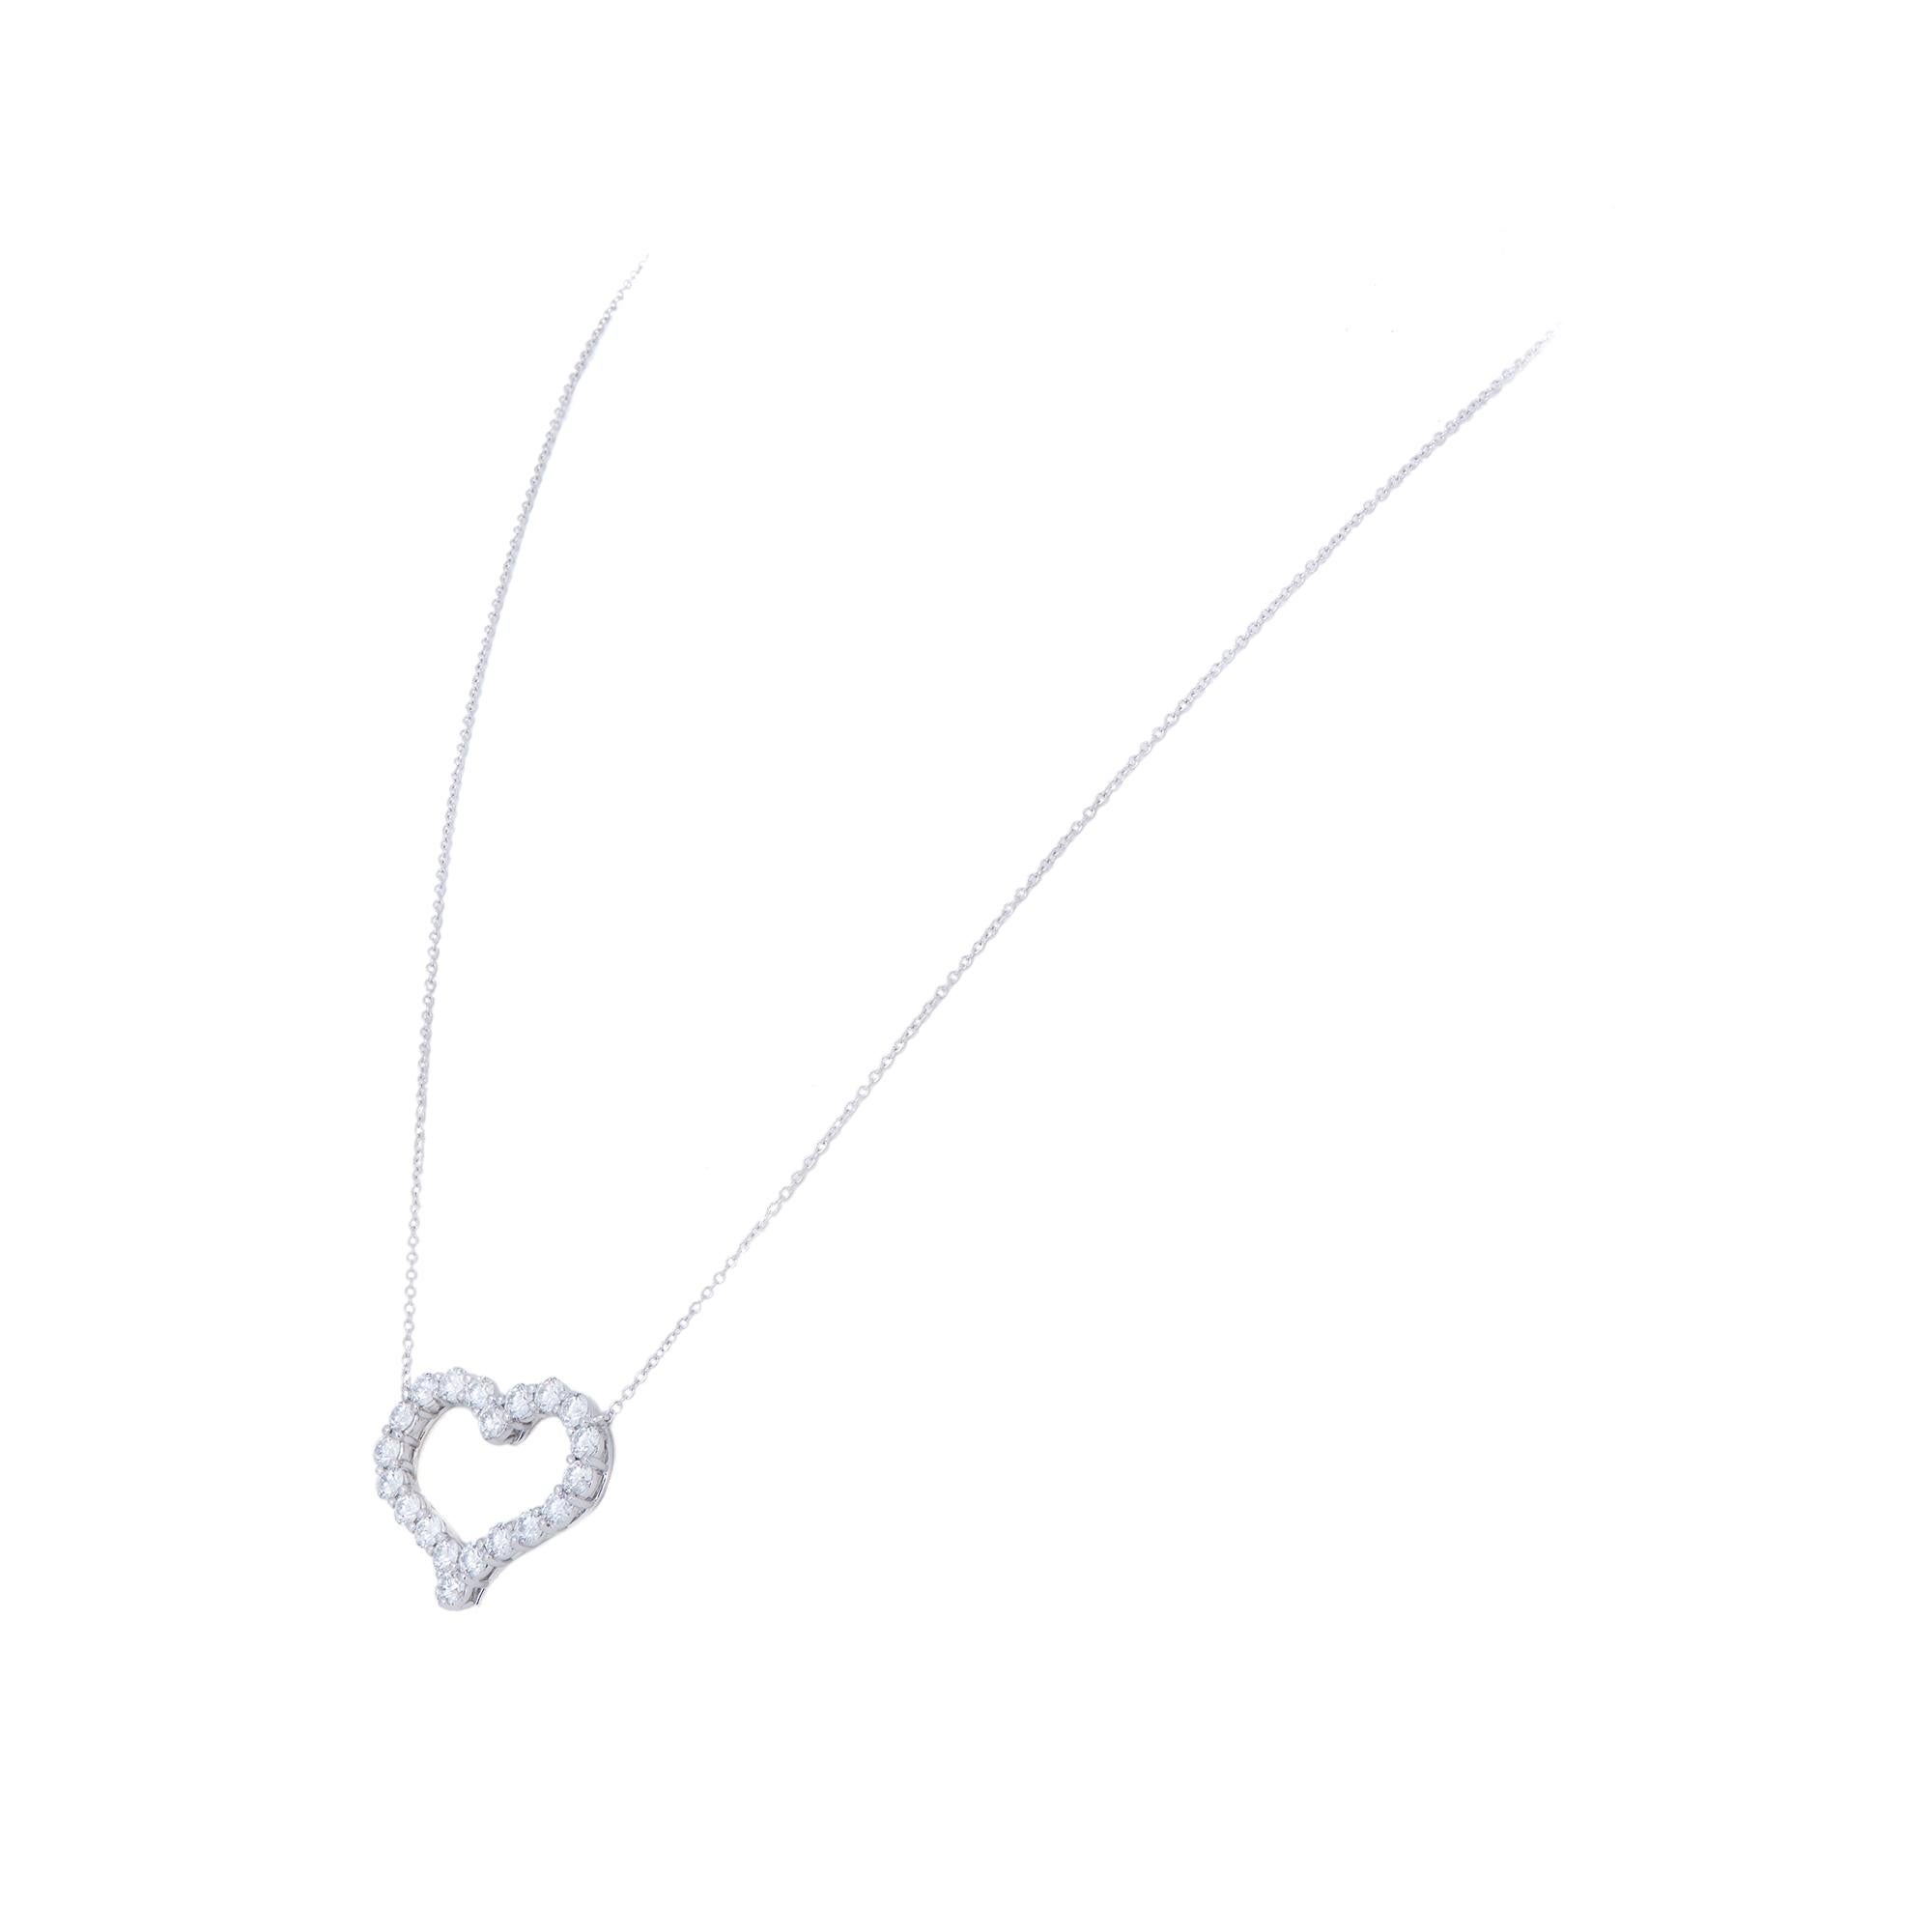 Authentic Tiffany & Co. pendant necklace crafted in platinum.  The dazzling heart pendant is set with approximately 1.96 carats of high-quality round brilliant cut diamonds and is situated on a 20 inch chain.  Pendant and chain are Signed Tiffany &